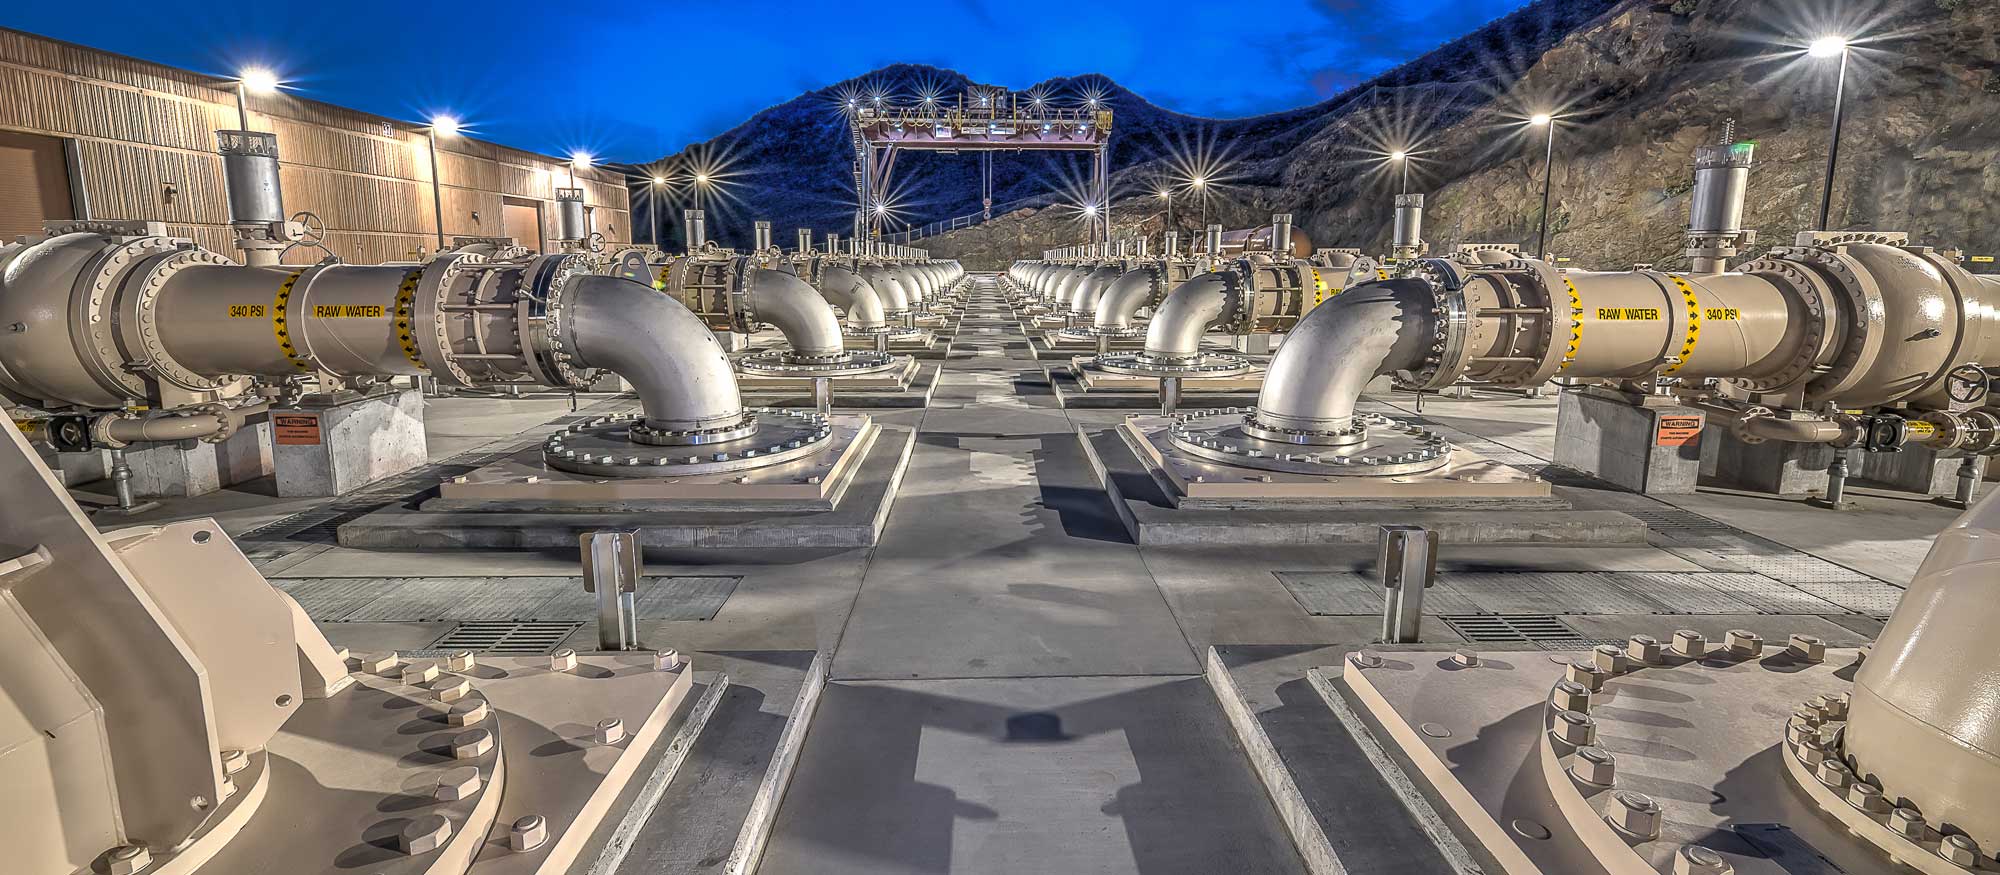 Night shot of pipes coming out of ground at Low Lake Level Pumping Station